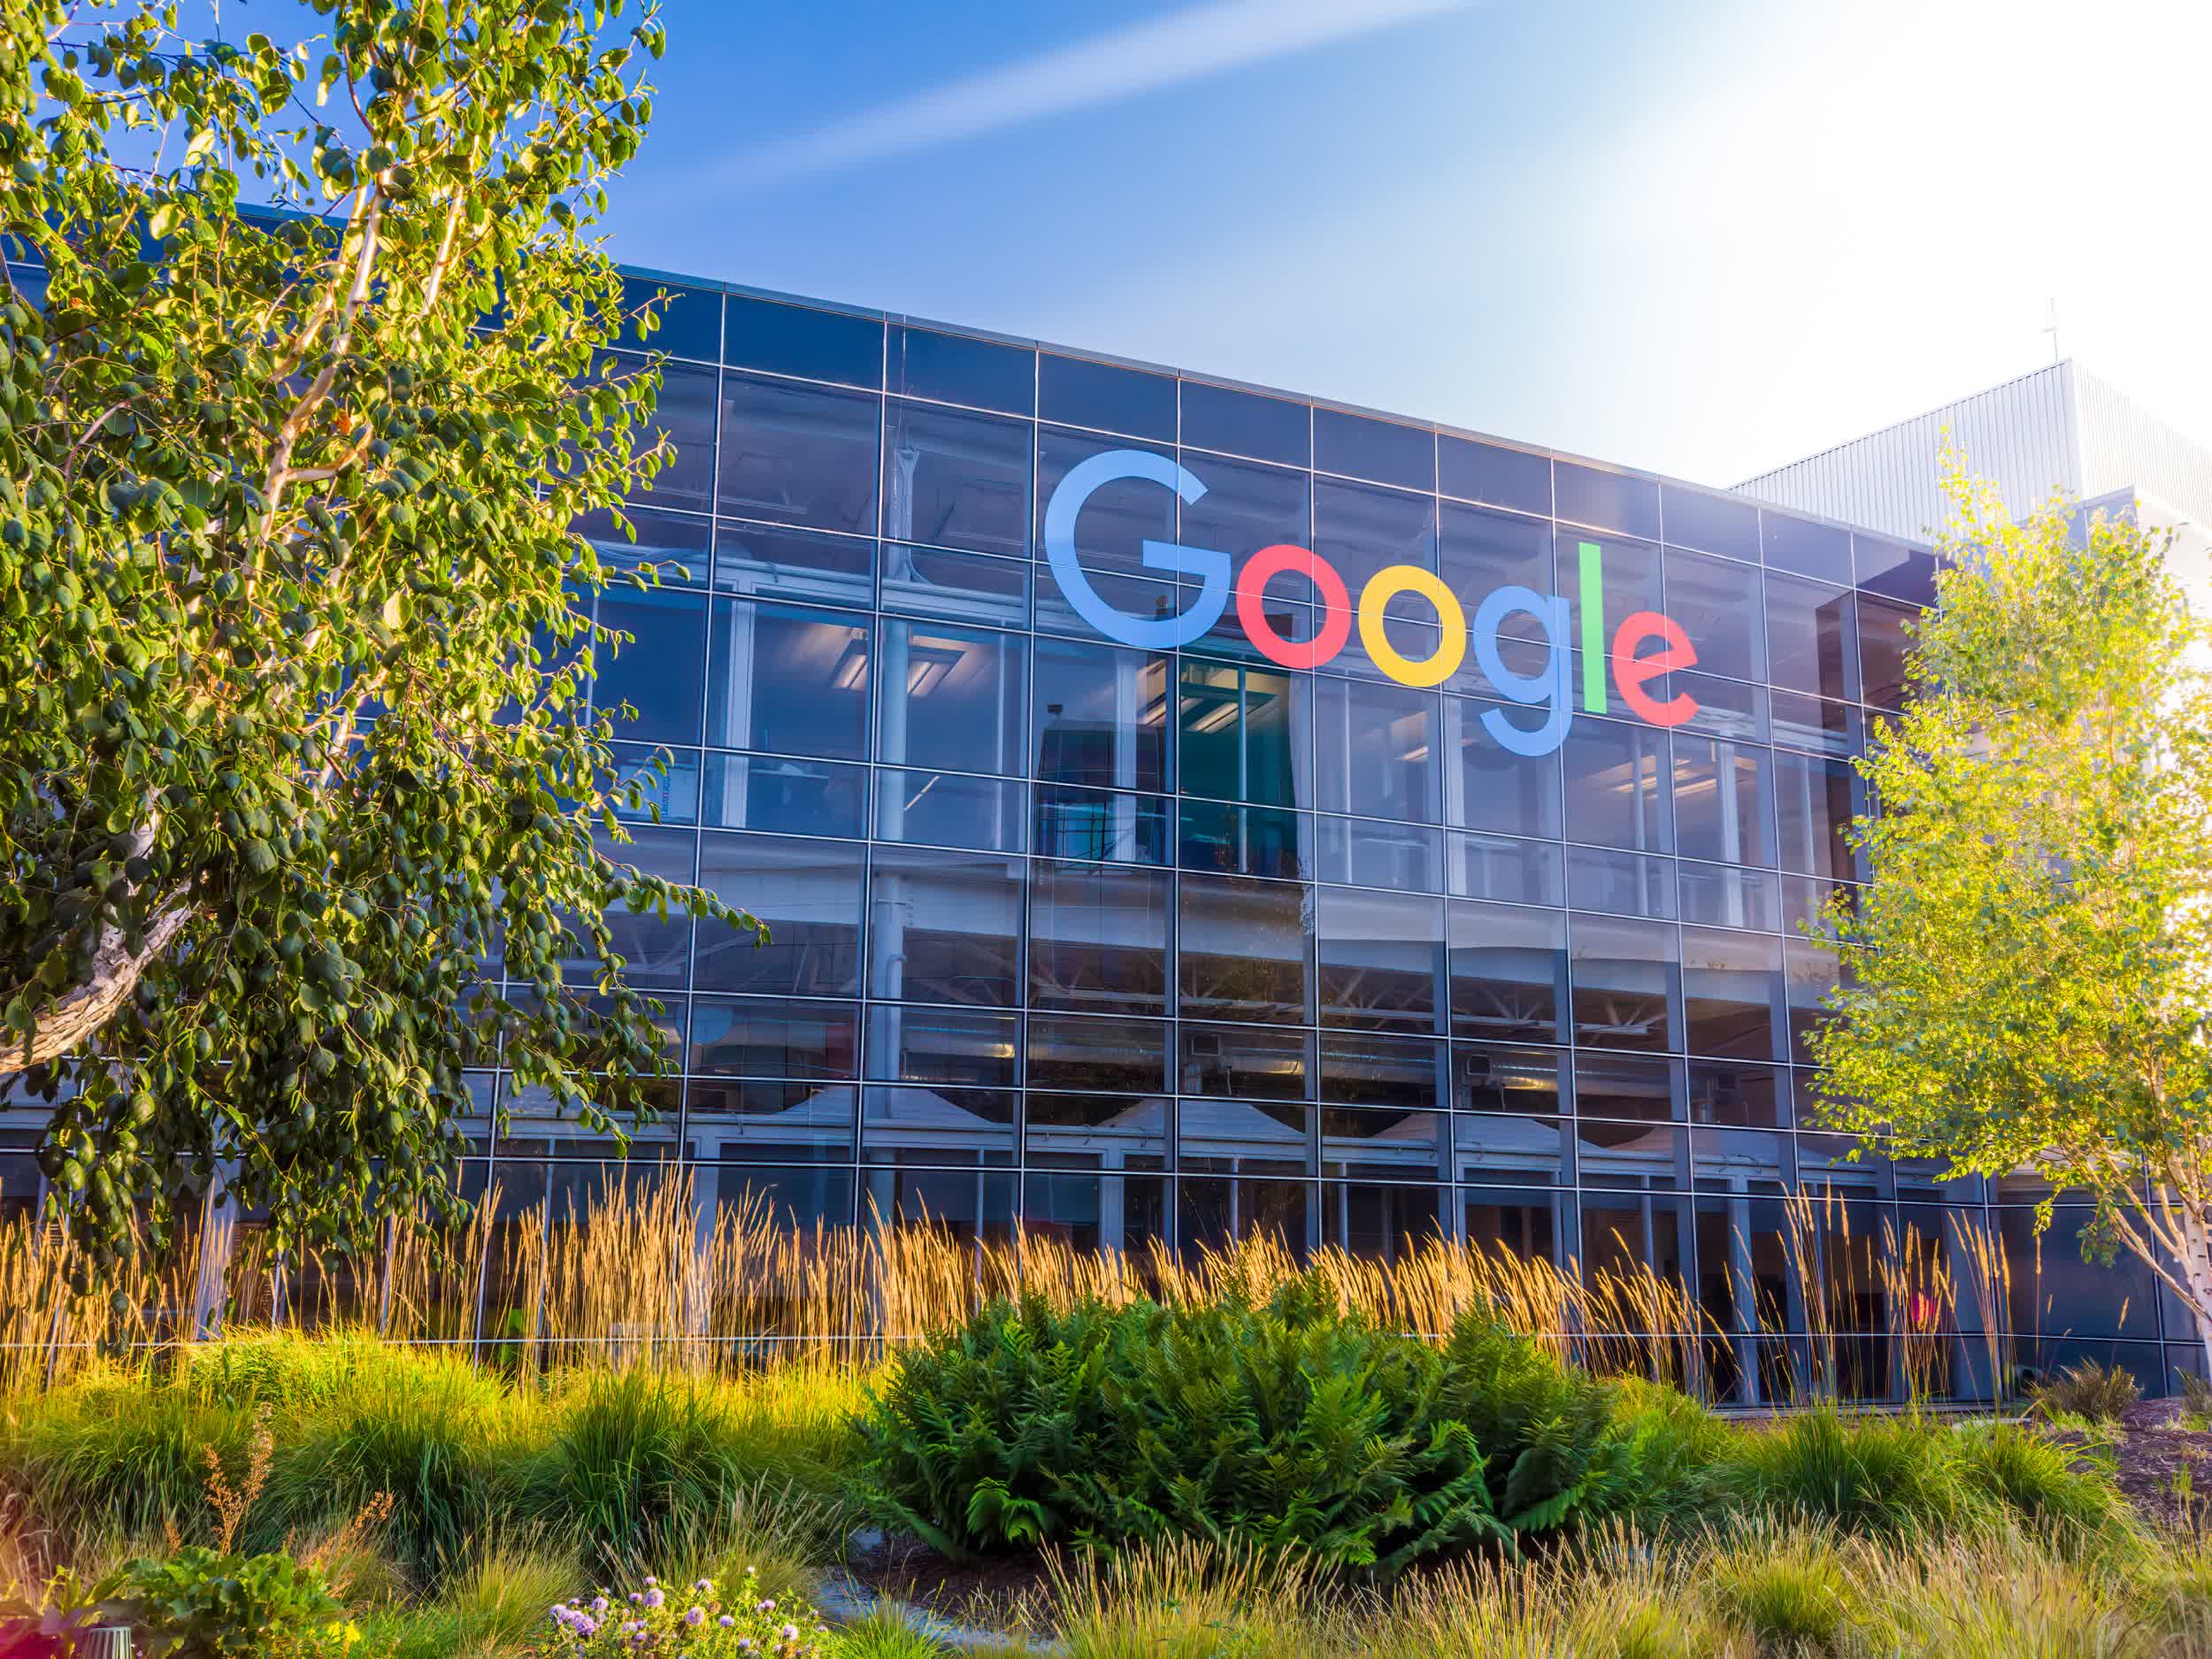 Google is testing a hybrid work week to balance productivity and safety